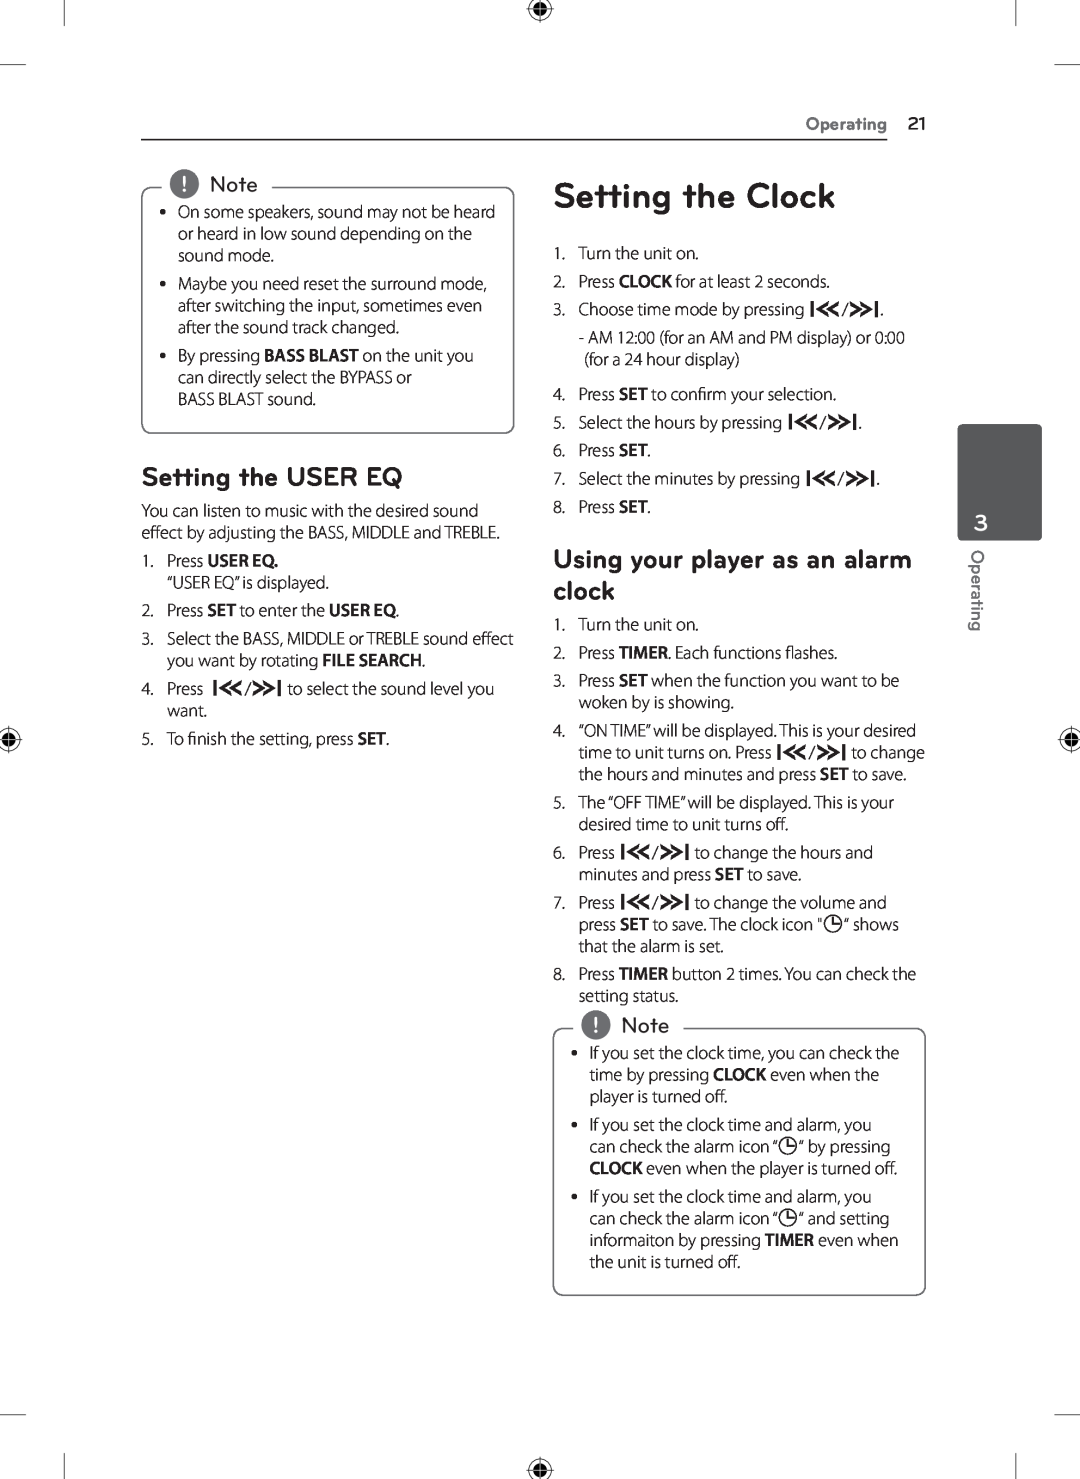 LG Electronics KSM1506 owner manual Setting the Clock, Setting the USER EQ, Using your player as an alarm clock, Operating 